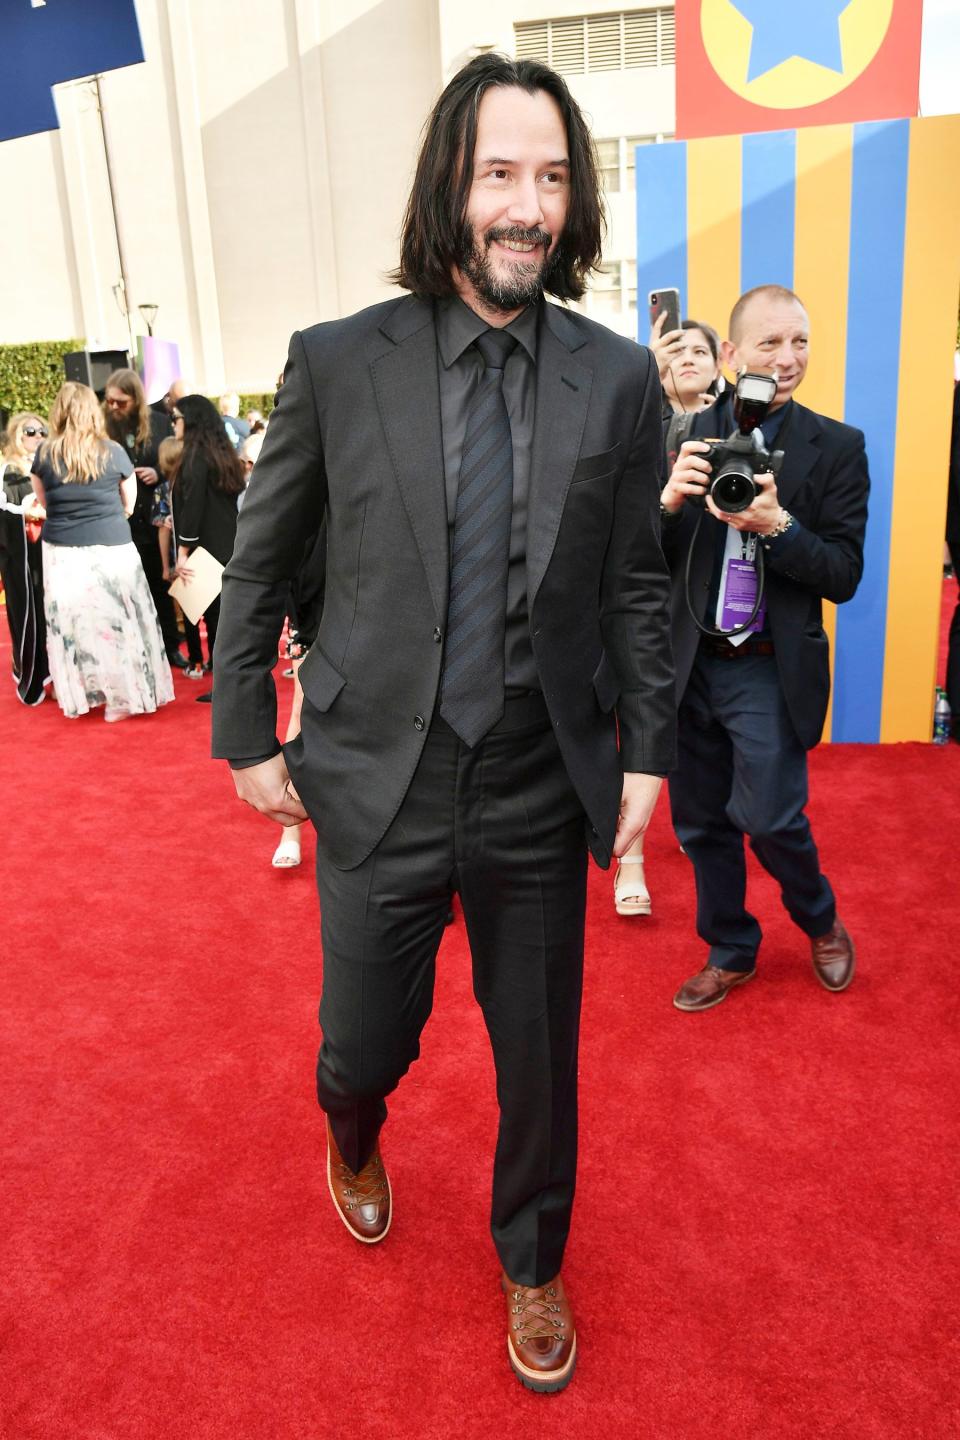 "Internet boyfriend" and one of the franchises new stars, Keanu Reeves, hit the carpet with a smile.